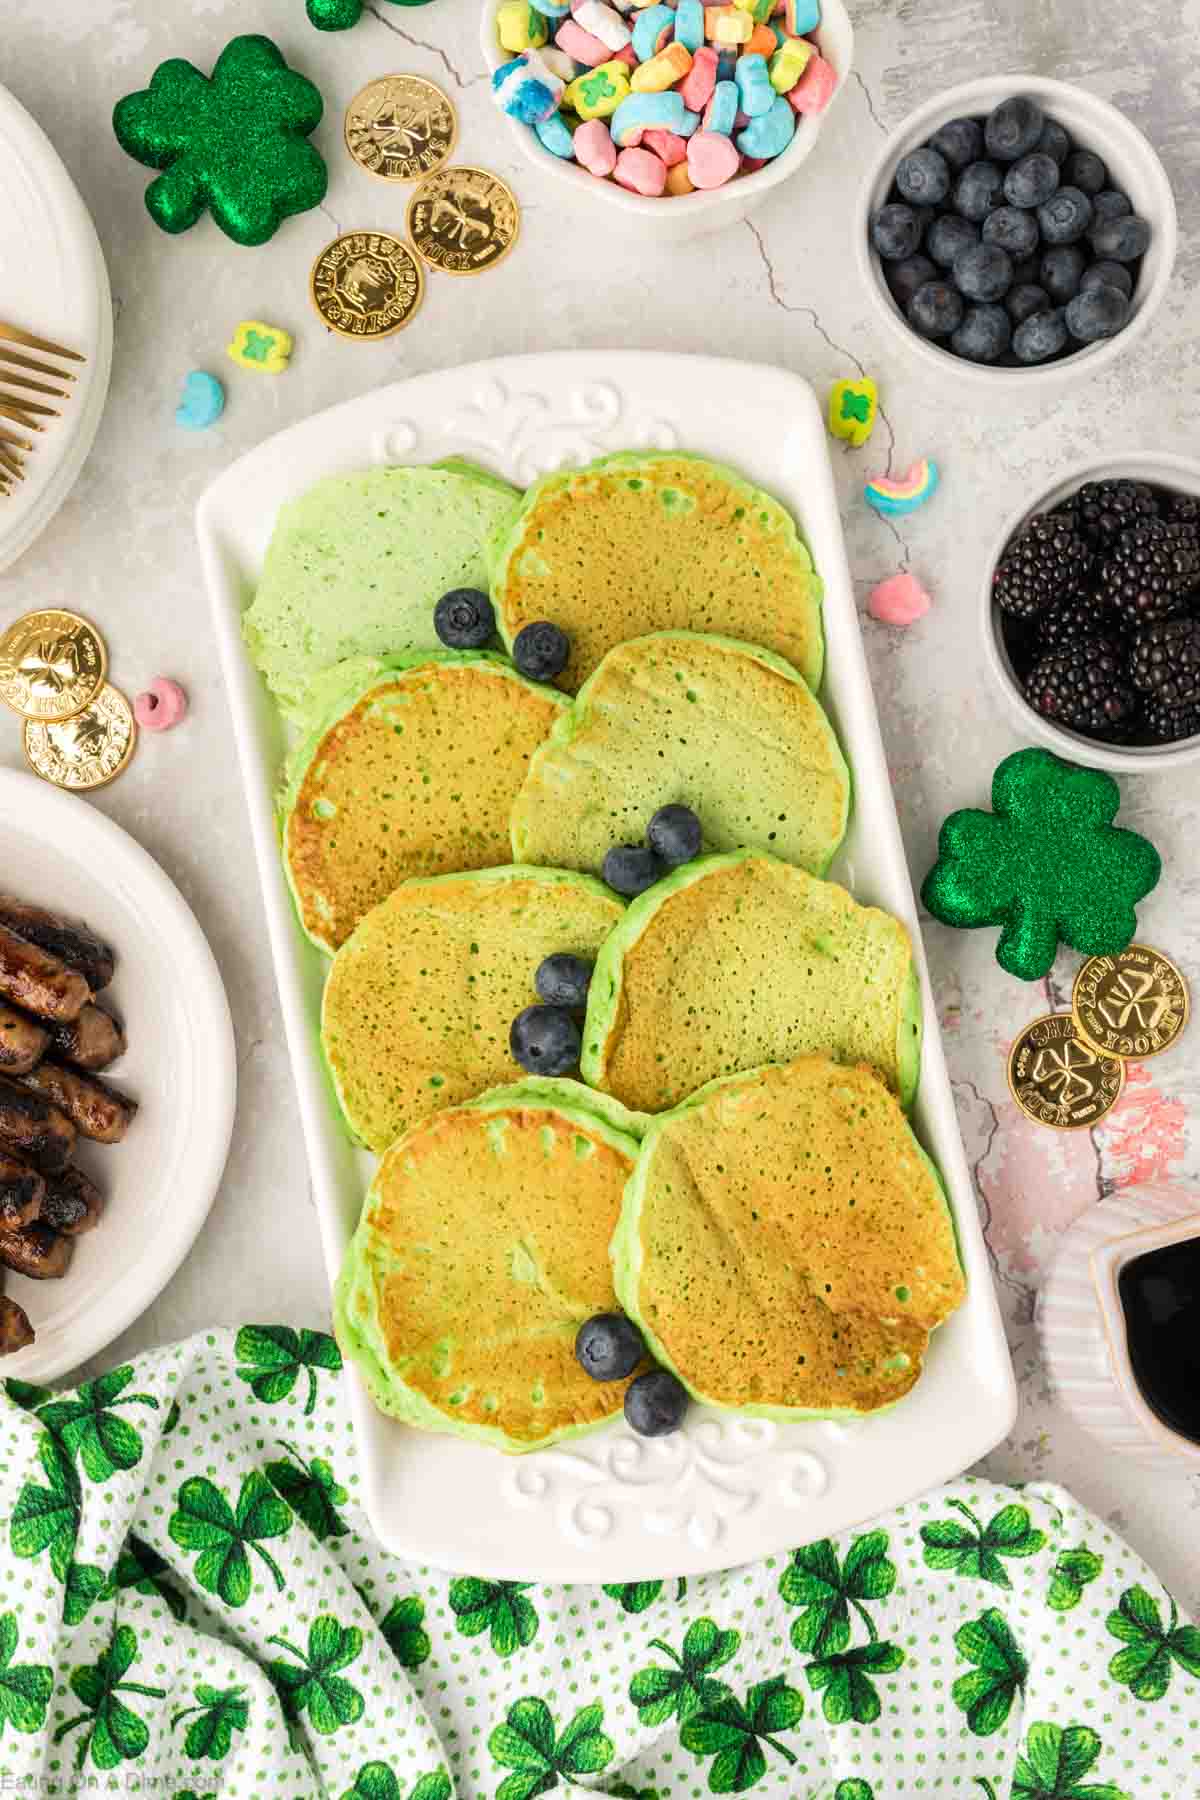 Green pancakes stacked on a platter with fresh blueberries and bowls of blueberries and blackberries